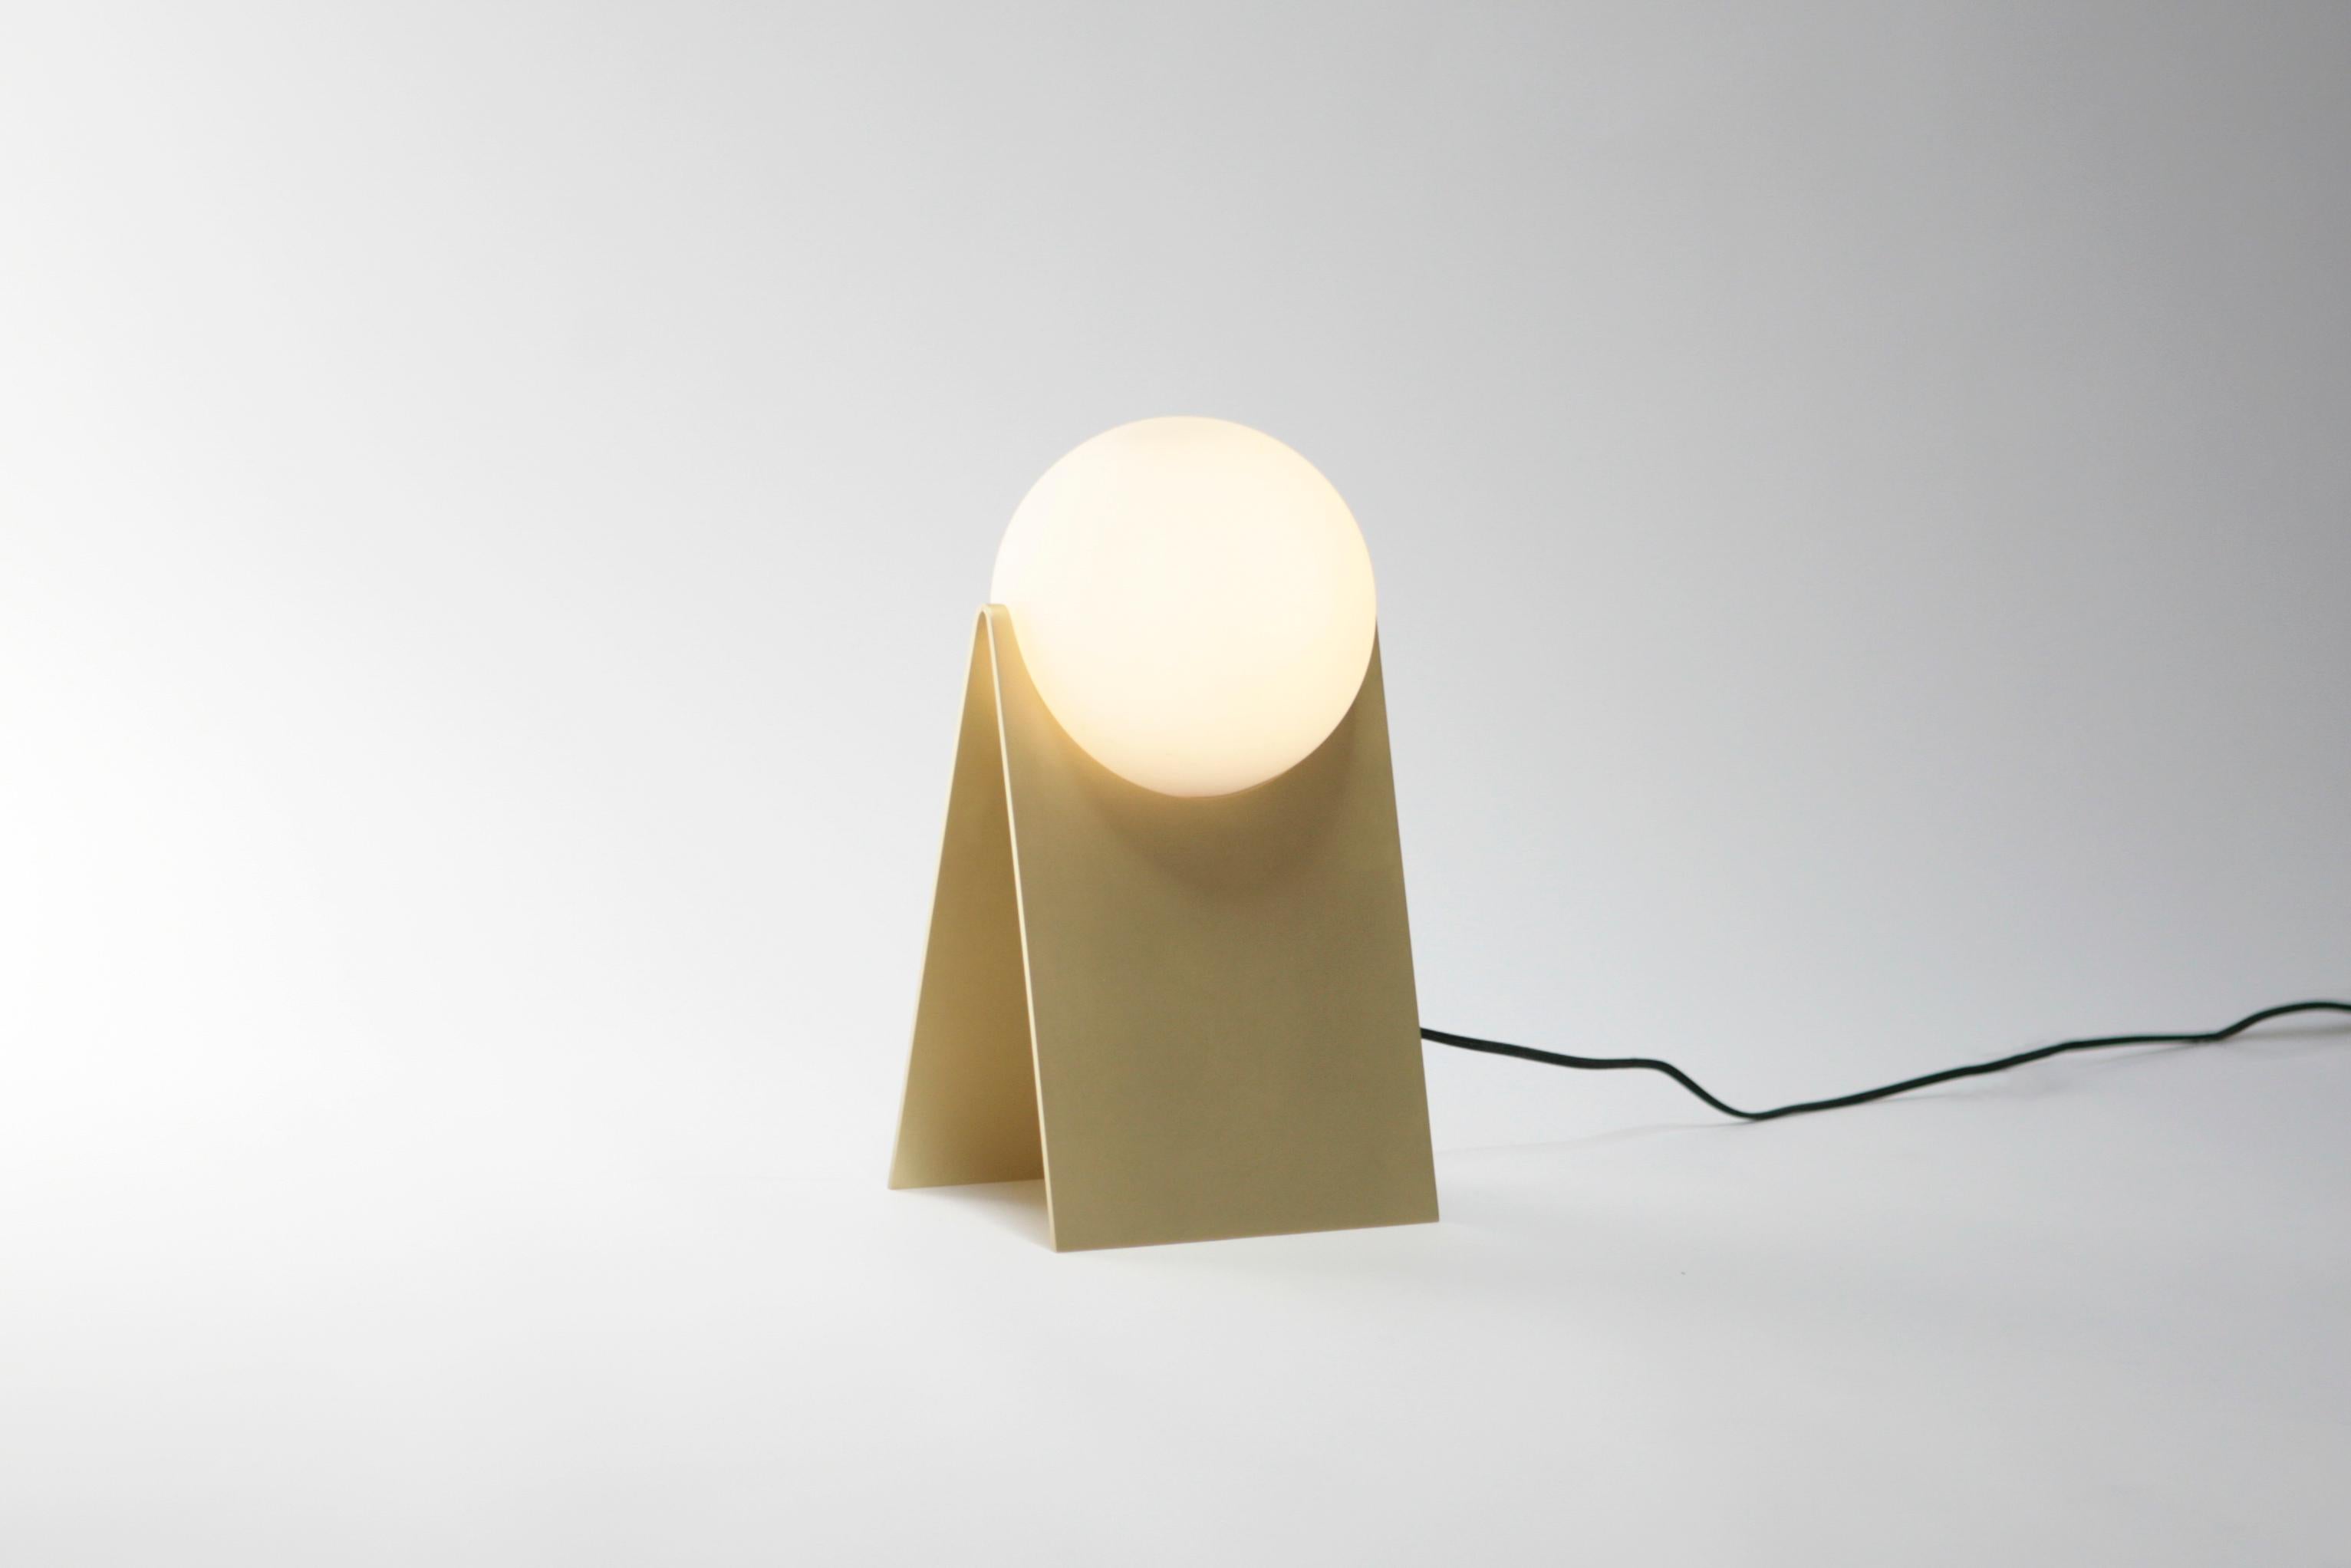 Luna lamp by Estudio Persona
Dimensions: W 15.2 x D 17.8 x H 33 cm
Materials: Brass and hand blown glass

Table lamp in metal and hand blown glass.
Available in blackened steel and brass.
Customizations available.

Estudio Persona was